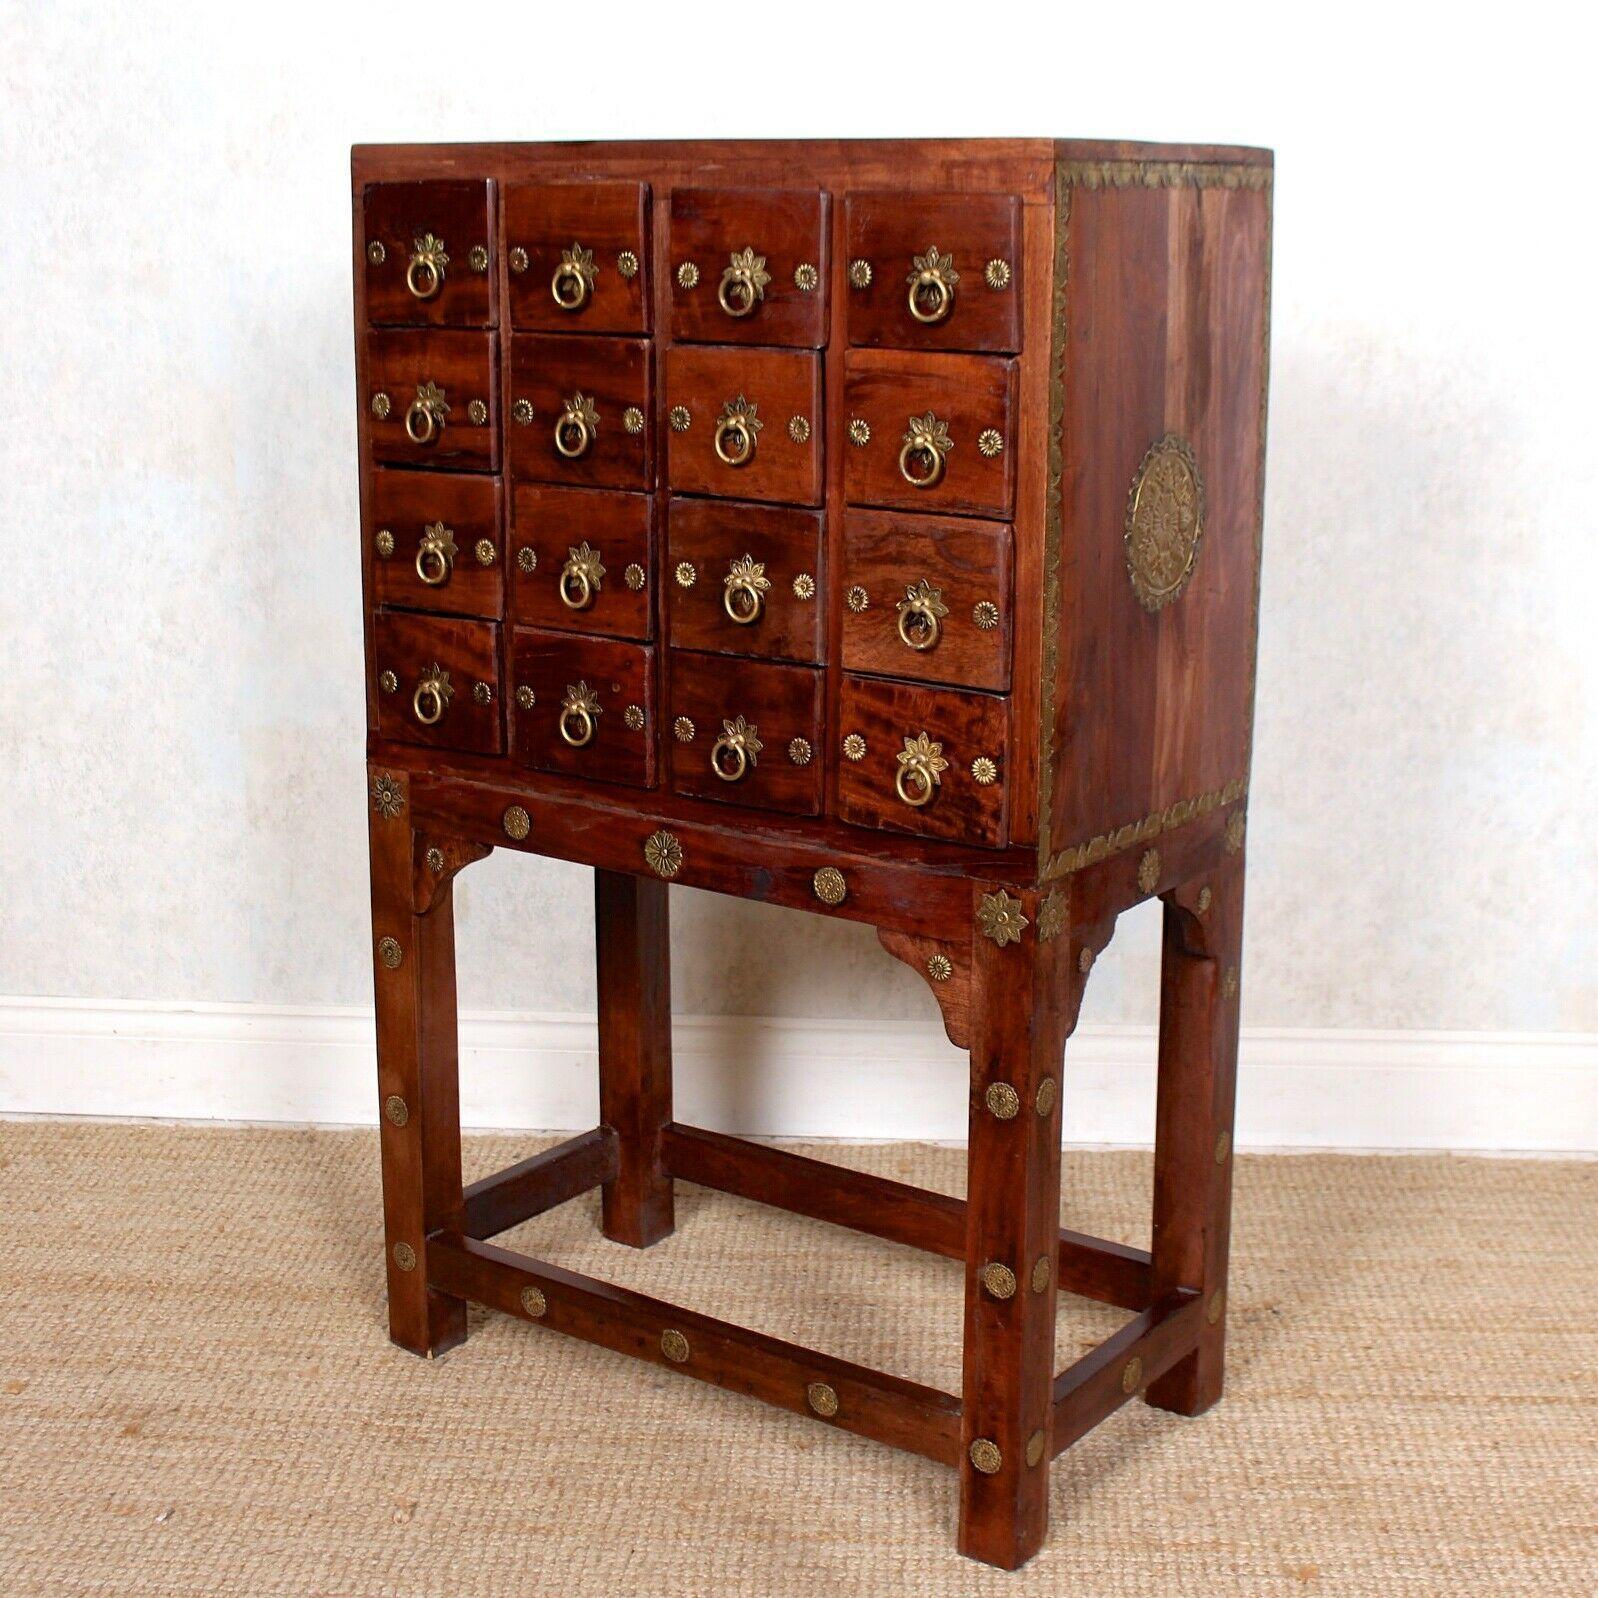 Chinese Apothecary Cabinet Spice Chest Haberdashery Oriental Hardwood For Sale 1